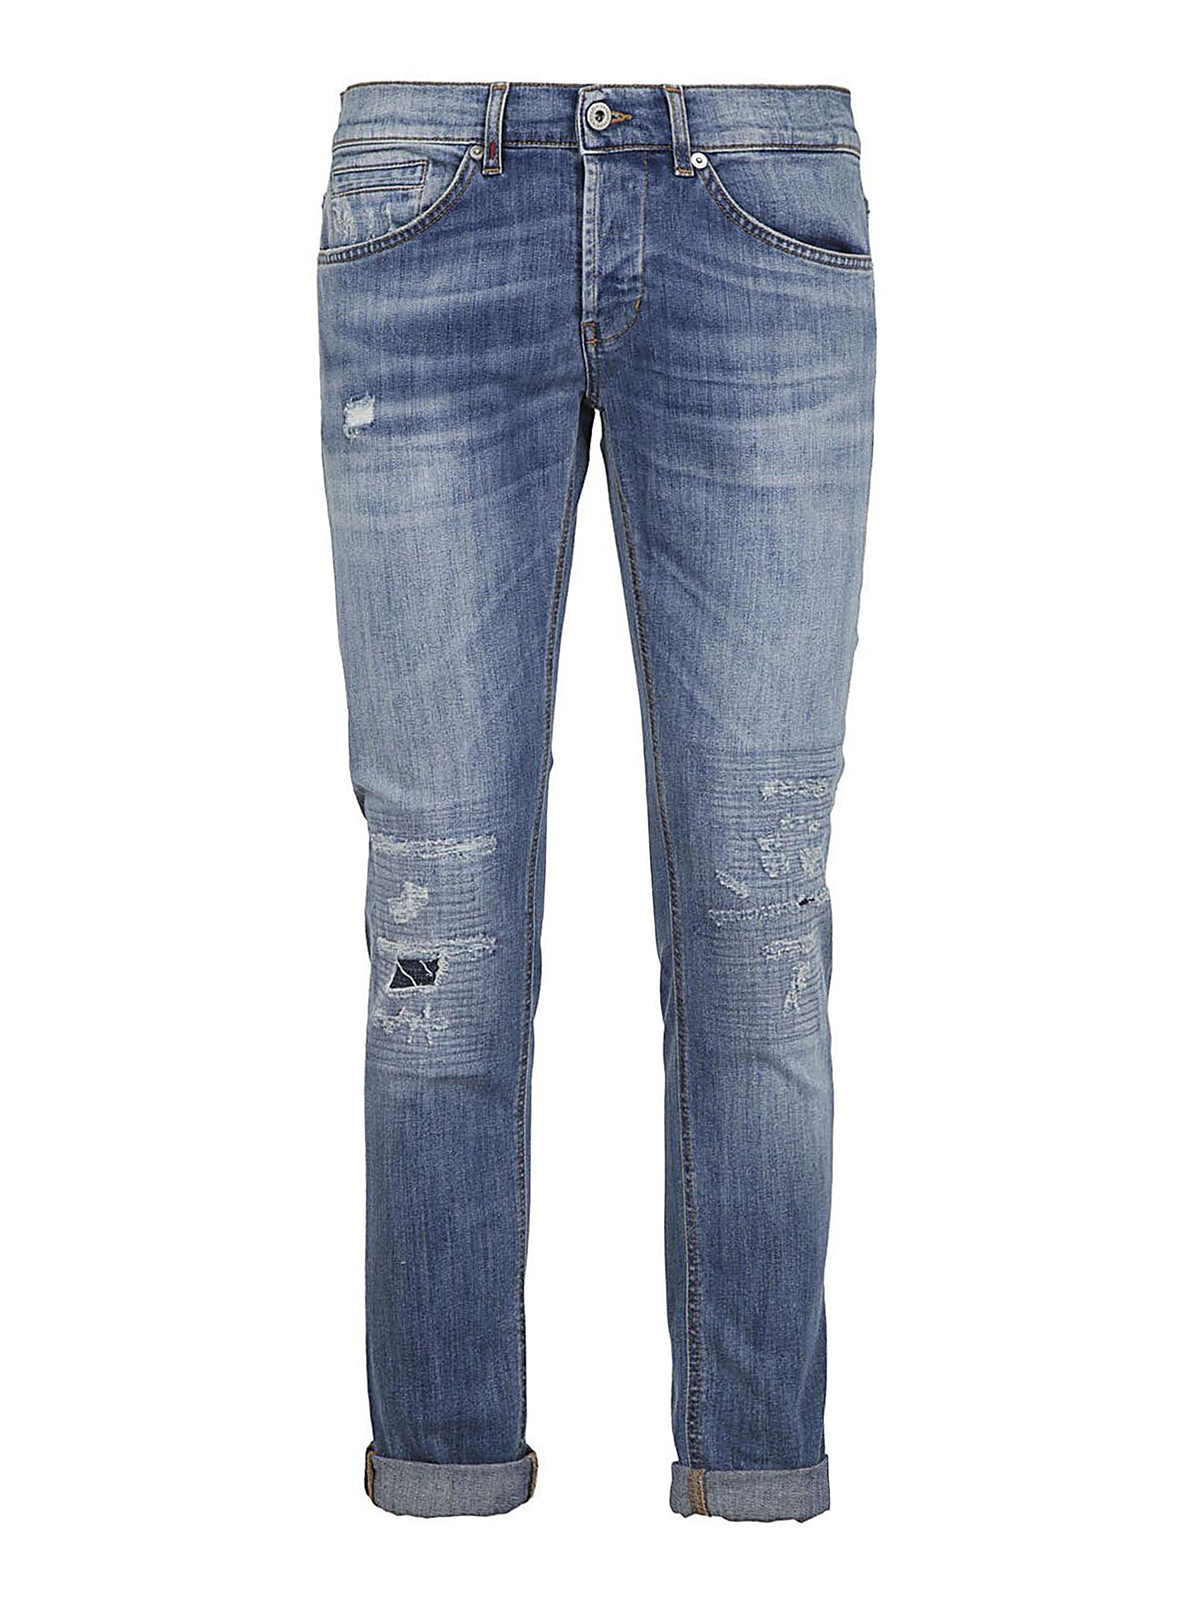 Skinny jeans Dondup - George skinny fit light wash jeans - UP232DS146S27T